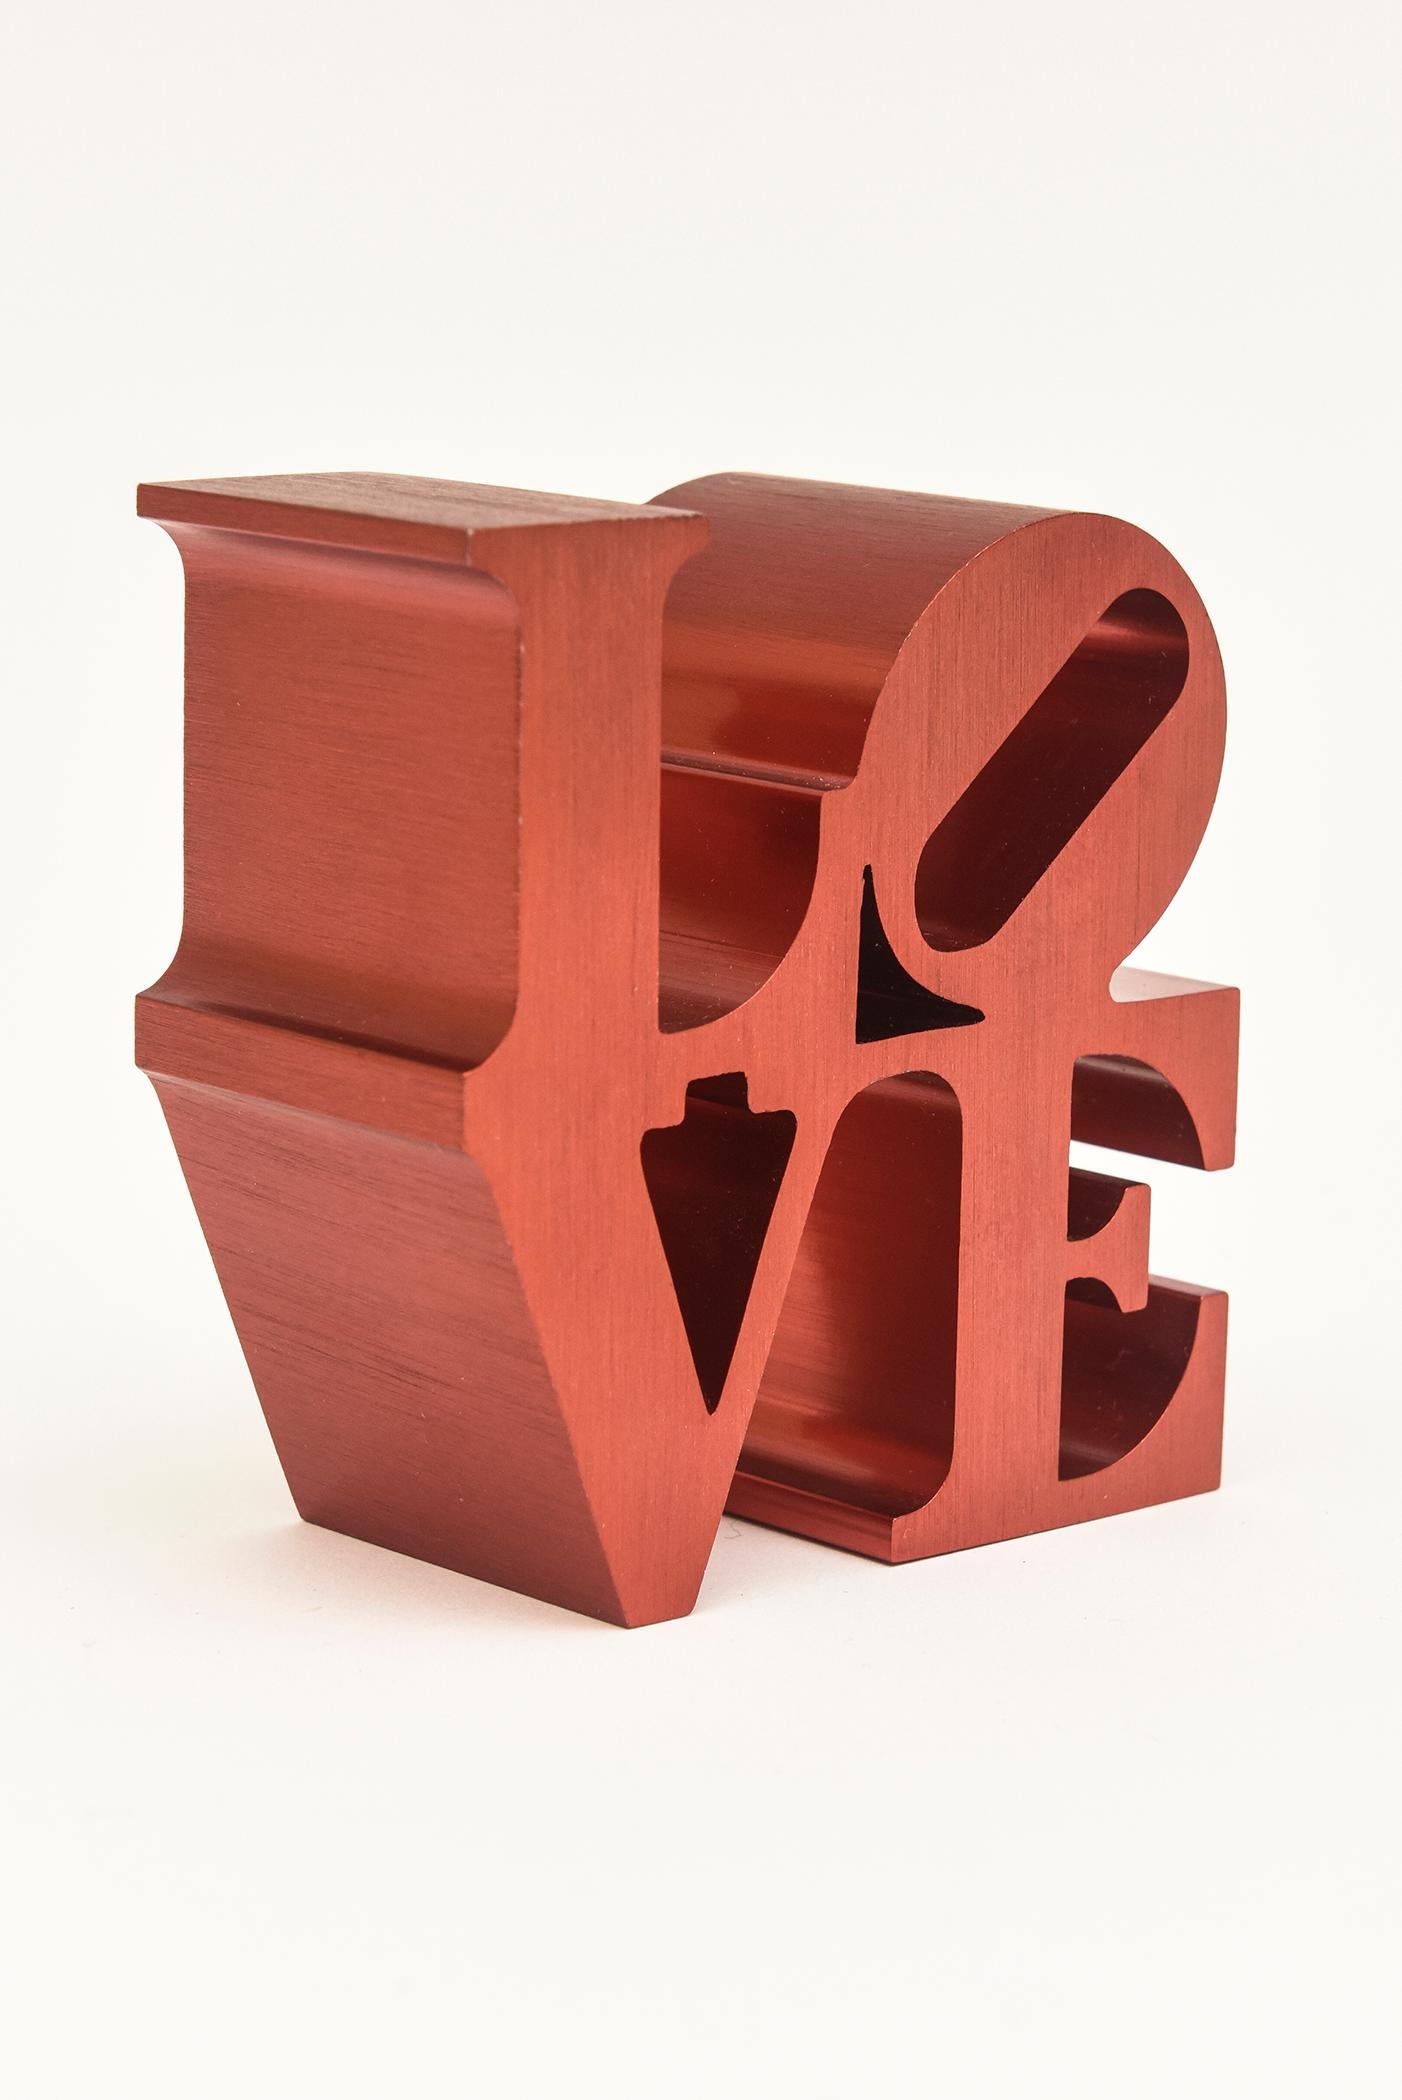 This very rare rendition and small edition of the vintage Robert Indiana love paperweight sculpture is rarely seen version in red brushed aluminum. This may have only been a very small and finite number of these made in the 1970s. We all need more